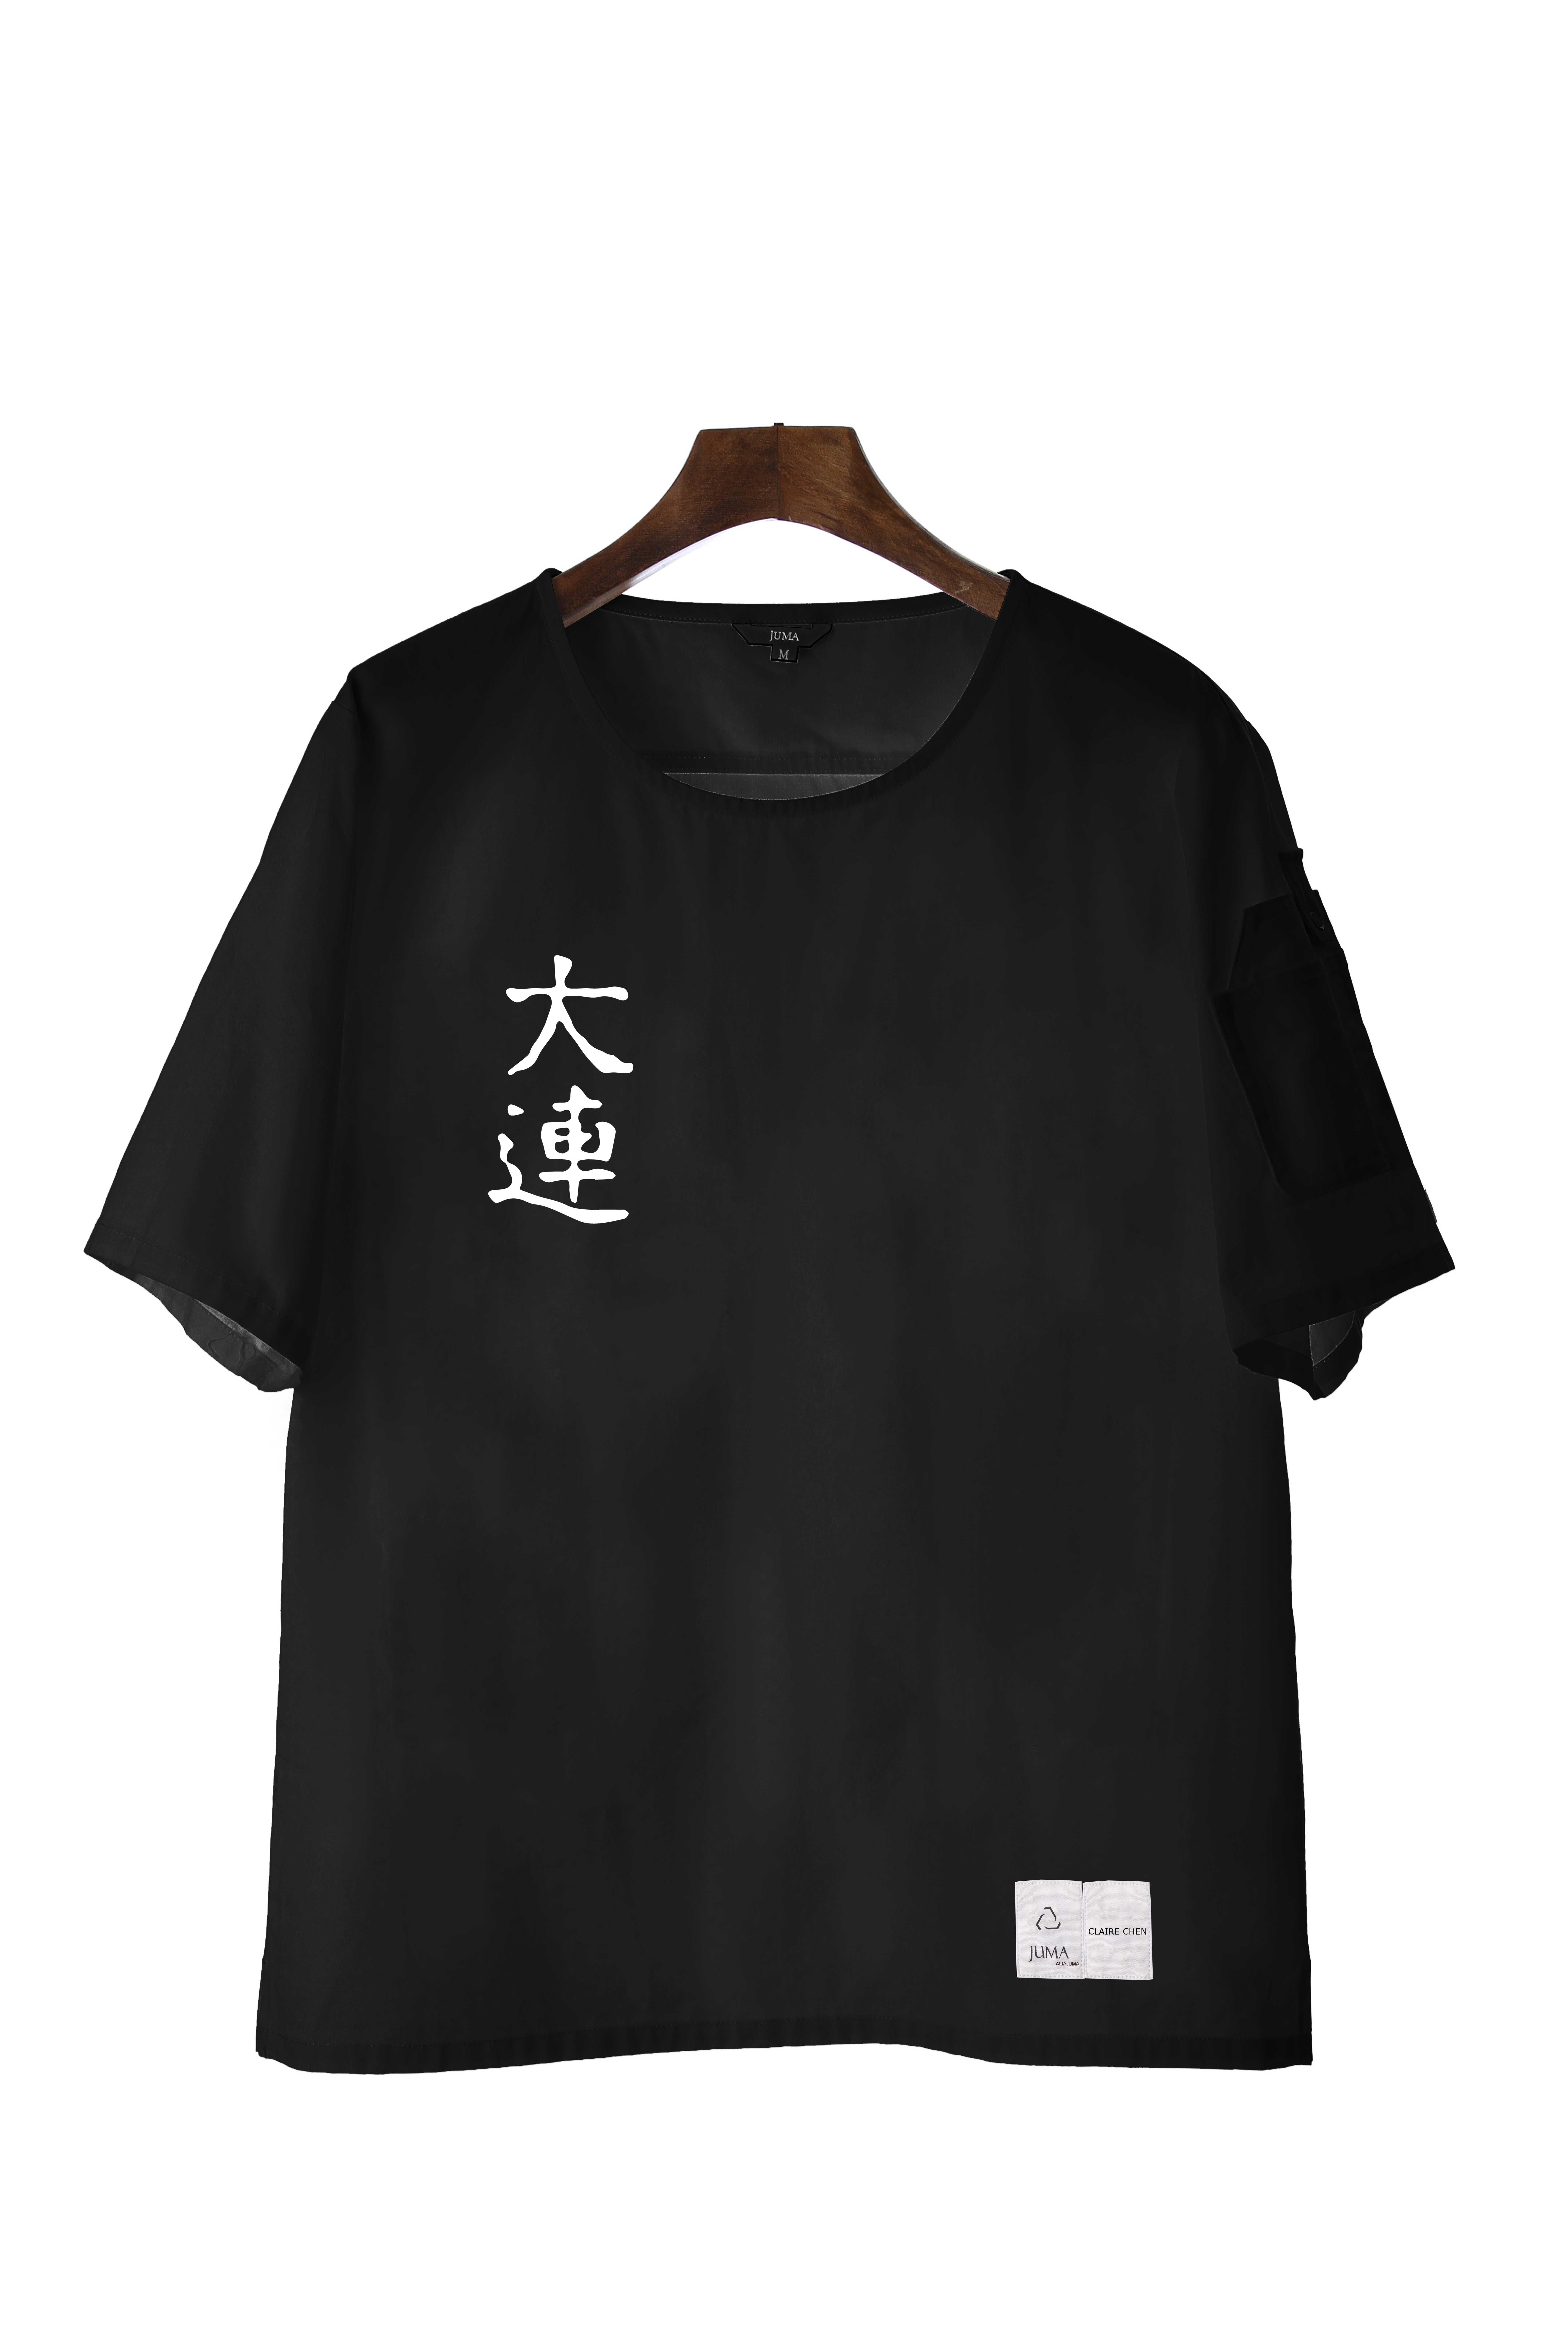 Claire Chen 短袖衬衫-4个回收水瓶-黑色｜Claire Chen Short Sleeve Shirt - 4 Recycled Water Bottles - Black